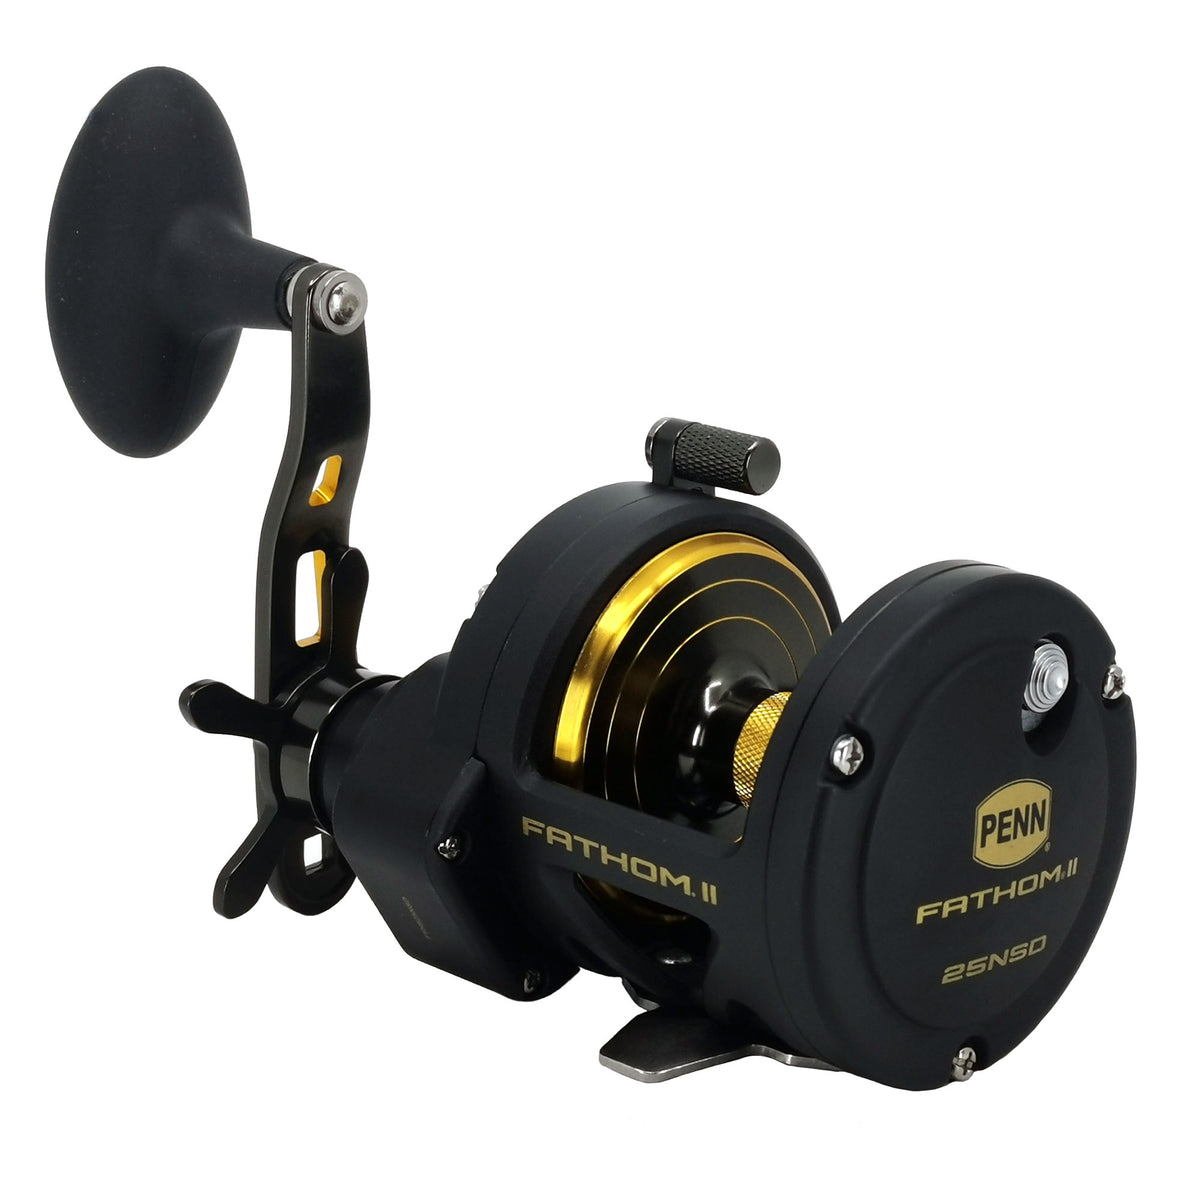 Penn Squall 15 saltwater fishing reel how to take apart and service 